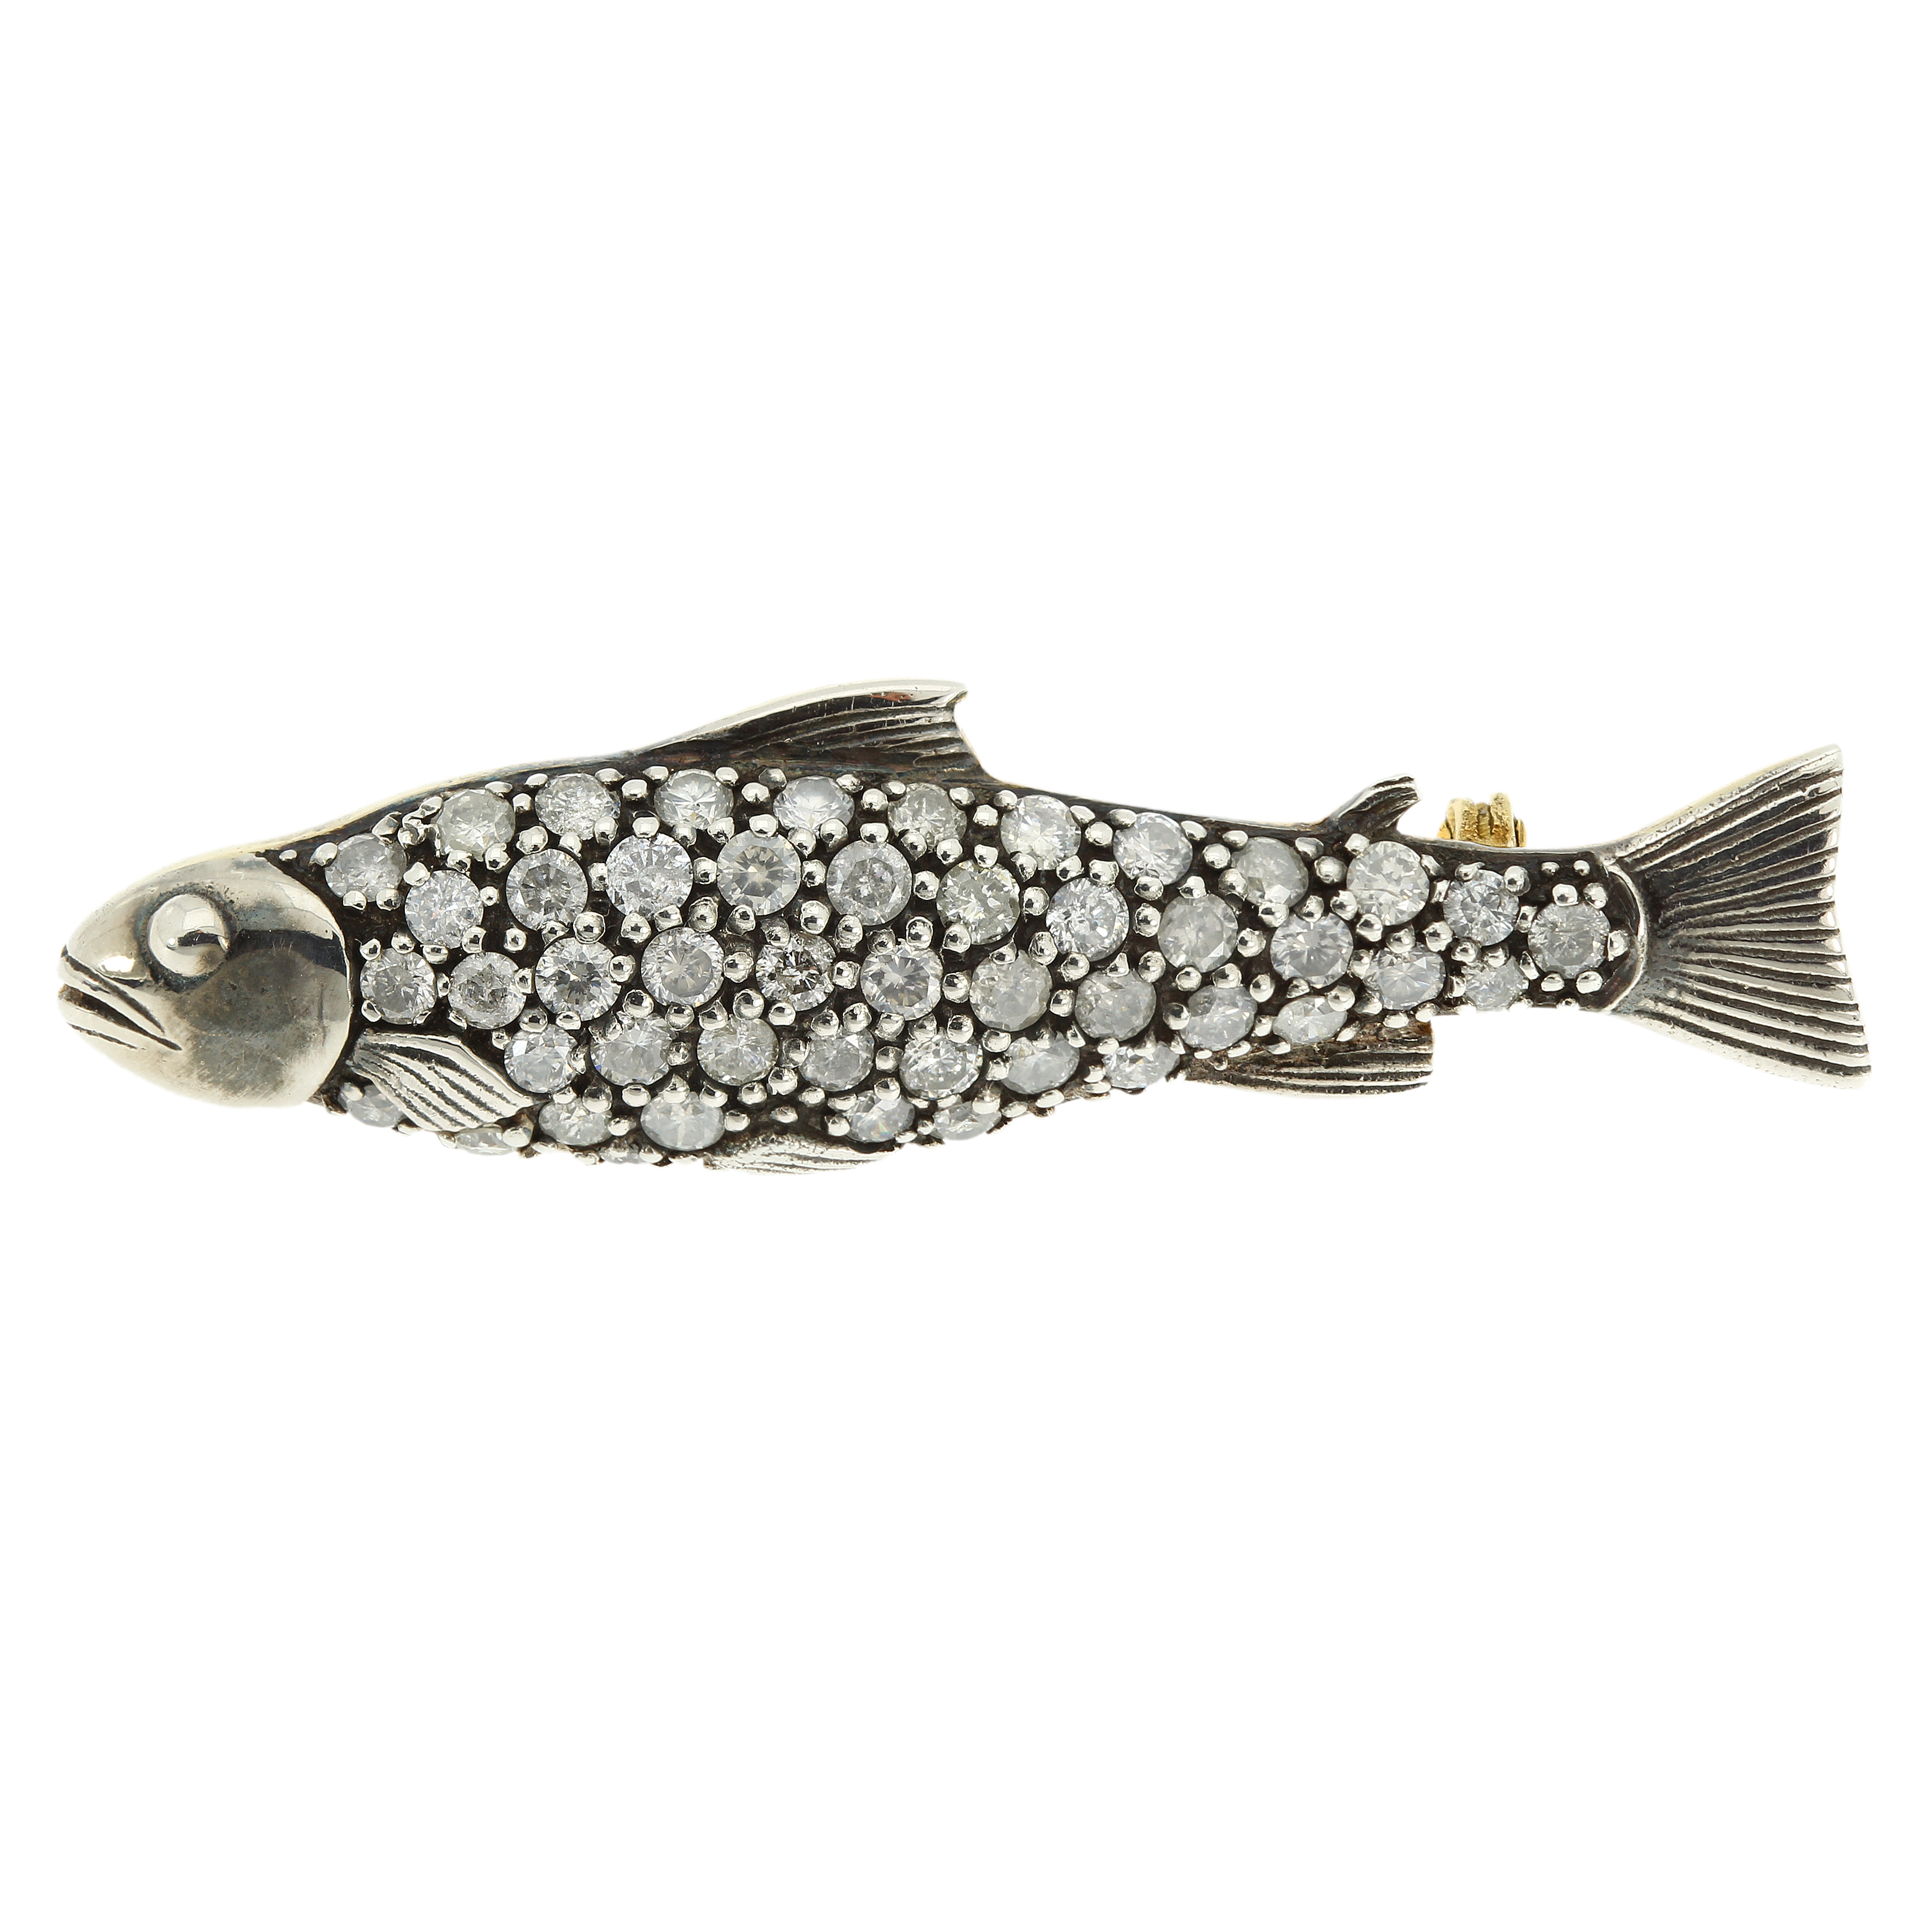 A JEWELLED DIAMOND FISH BROOCH in yellow and white gold, modeled as a fish, its body jewelled with